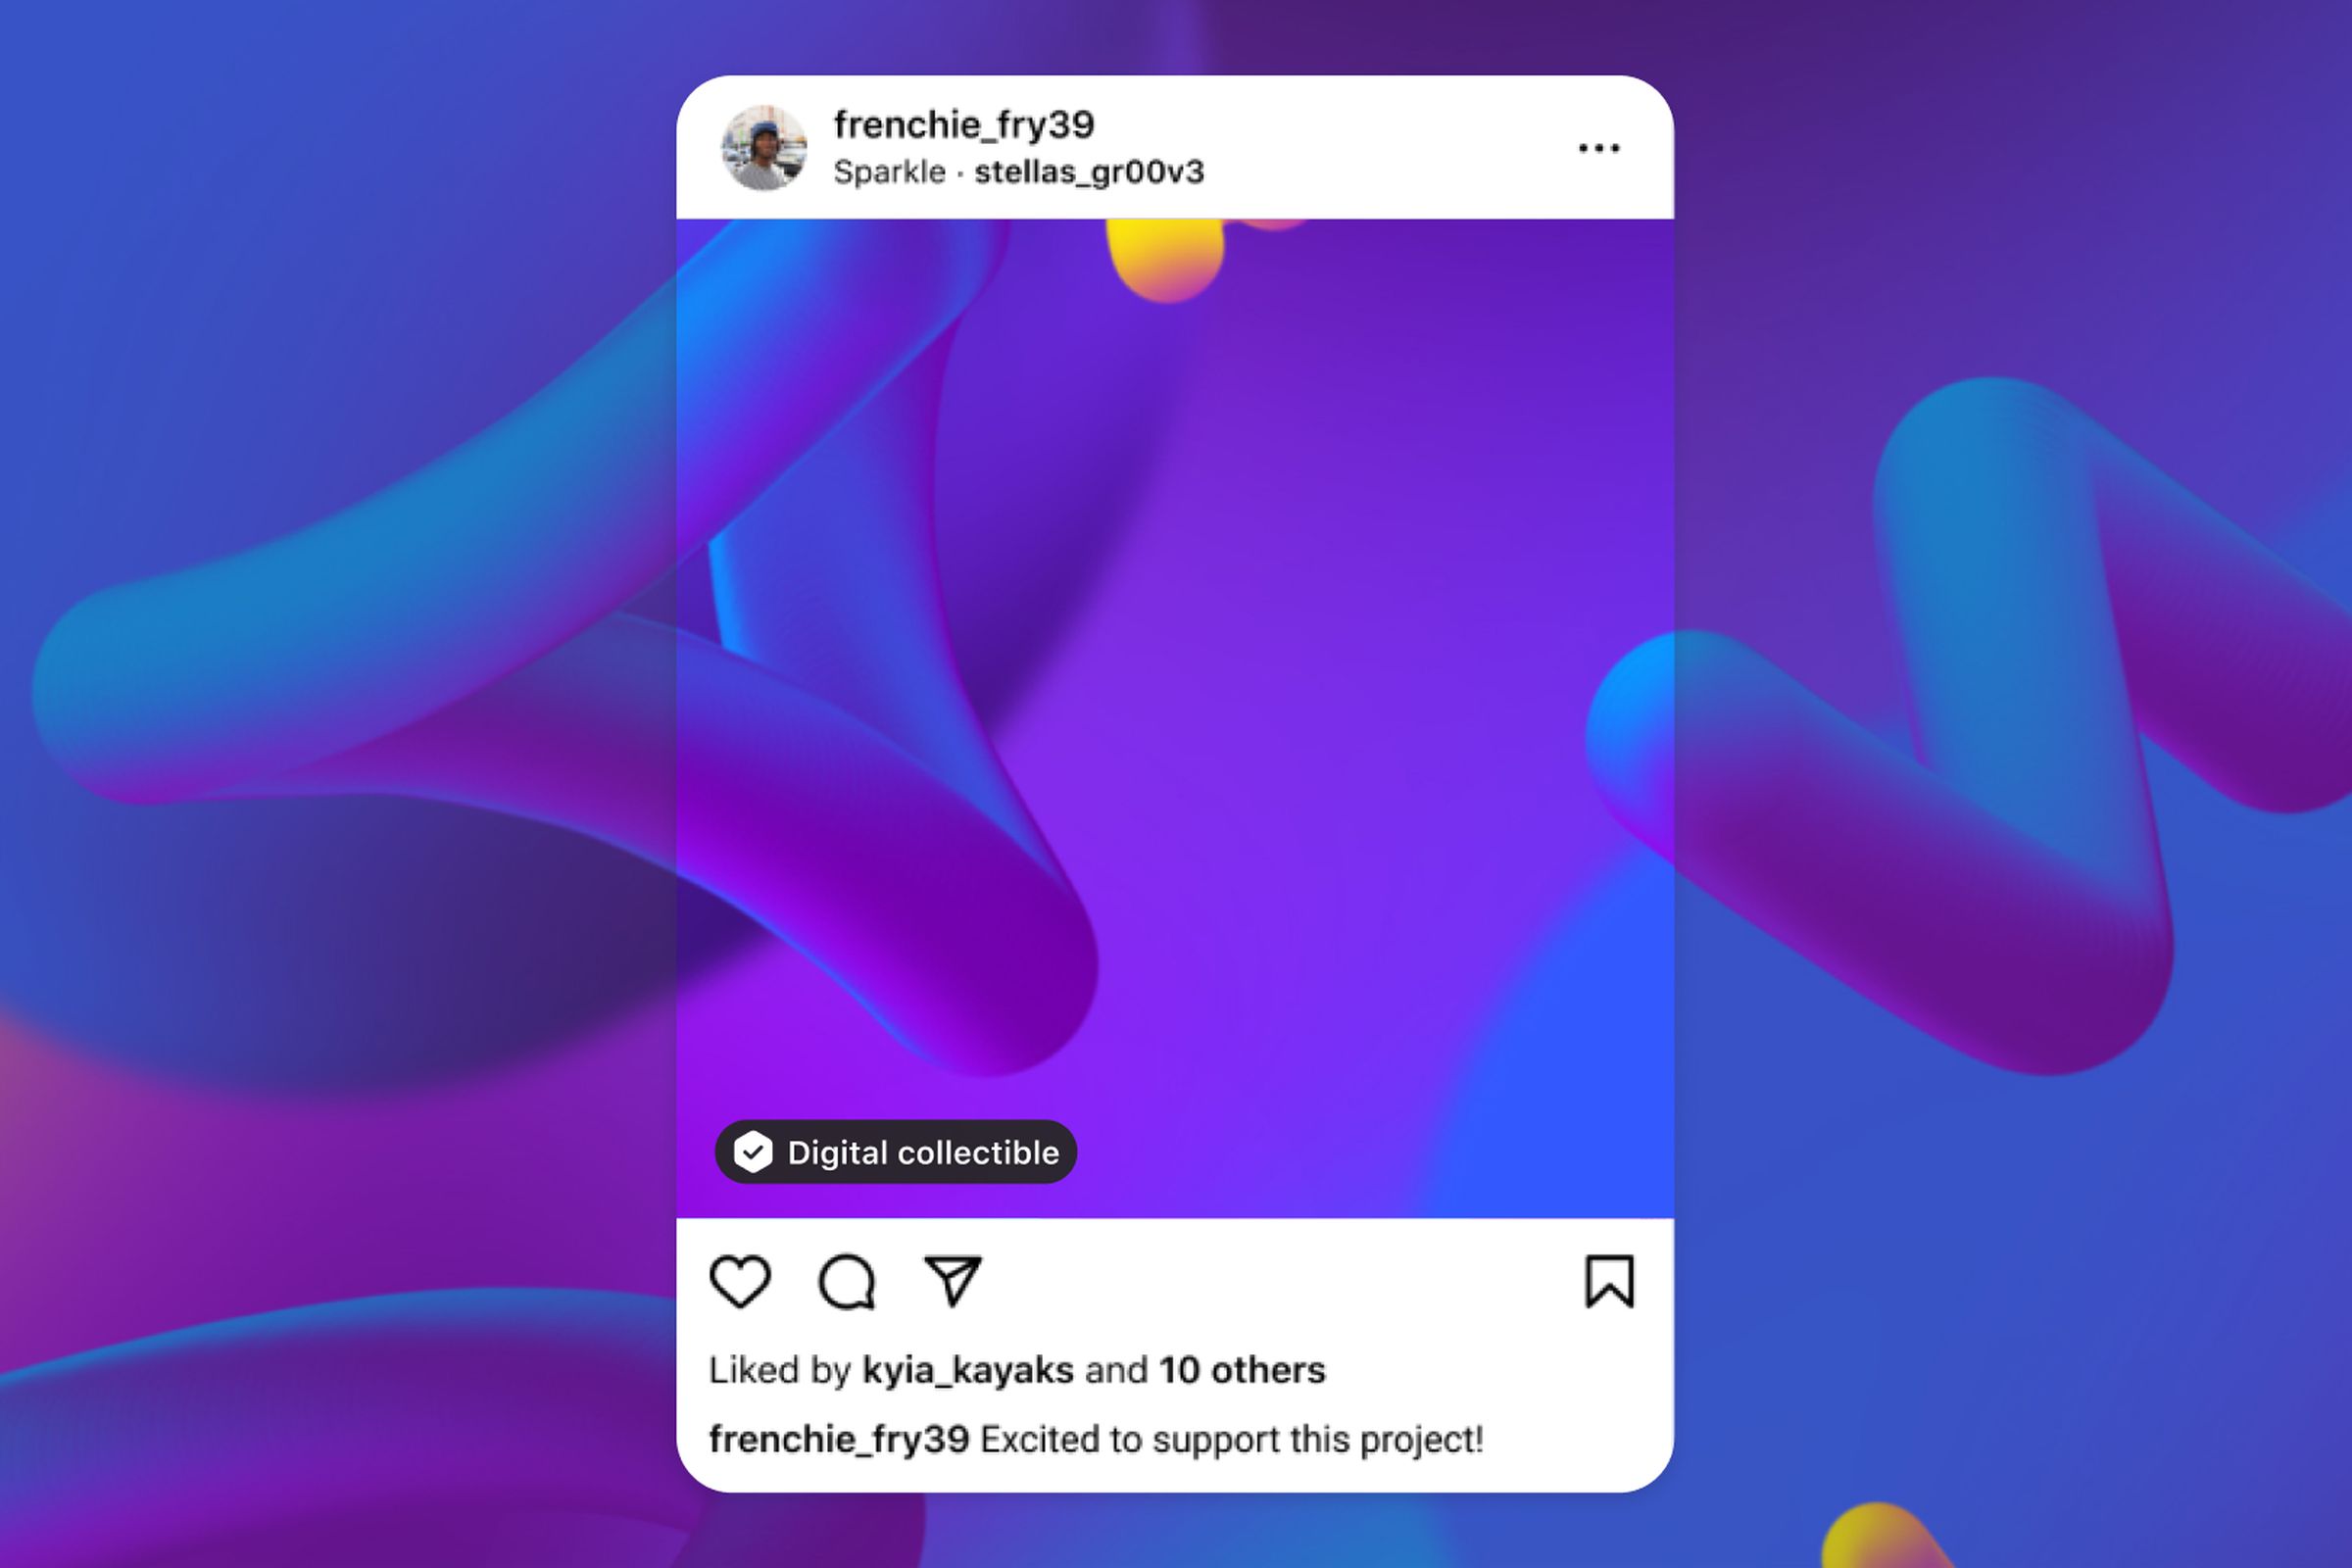 A screenshot of an Instagram post made using a digital collectible.